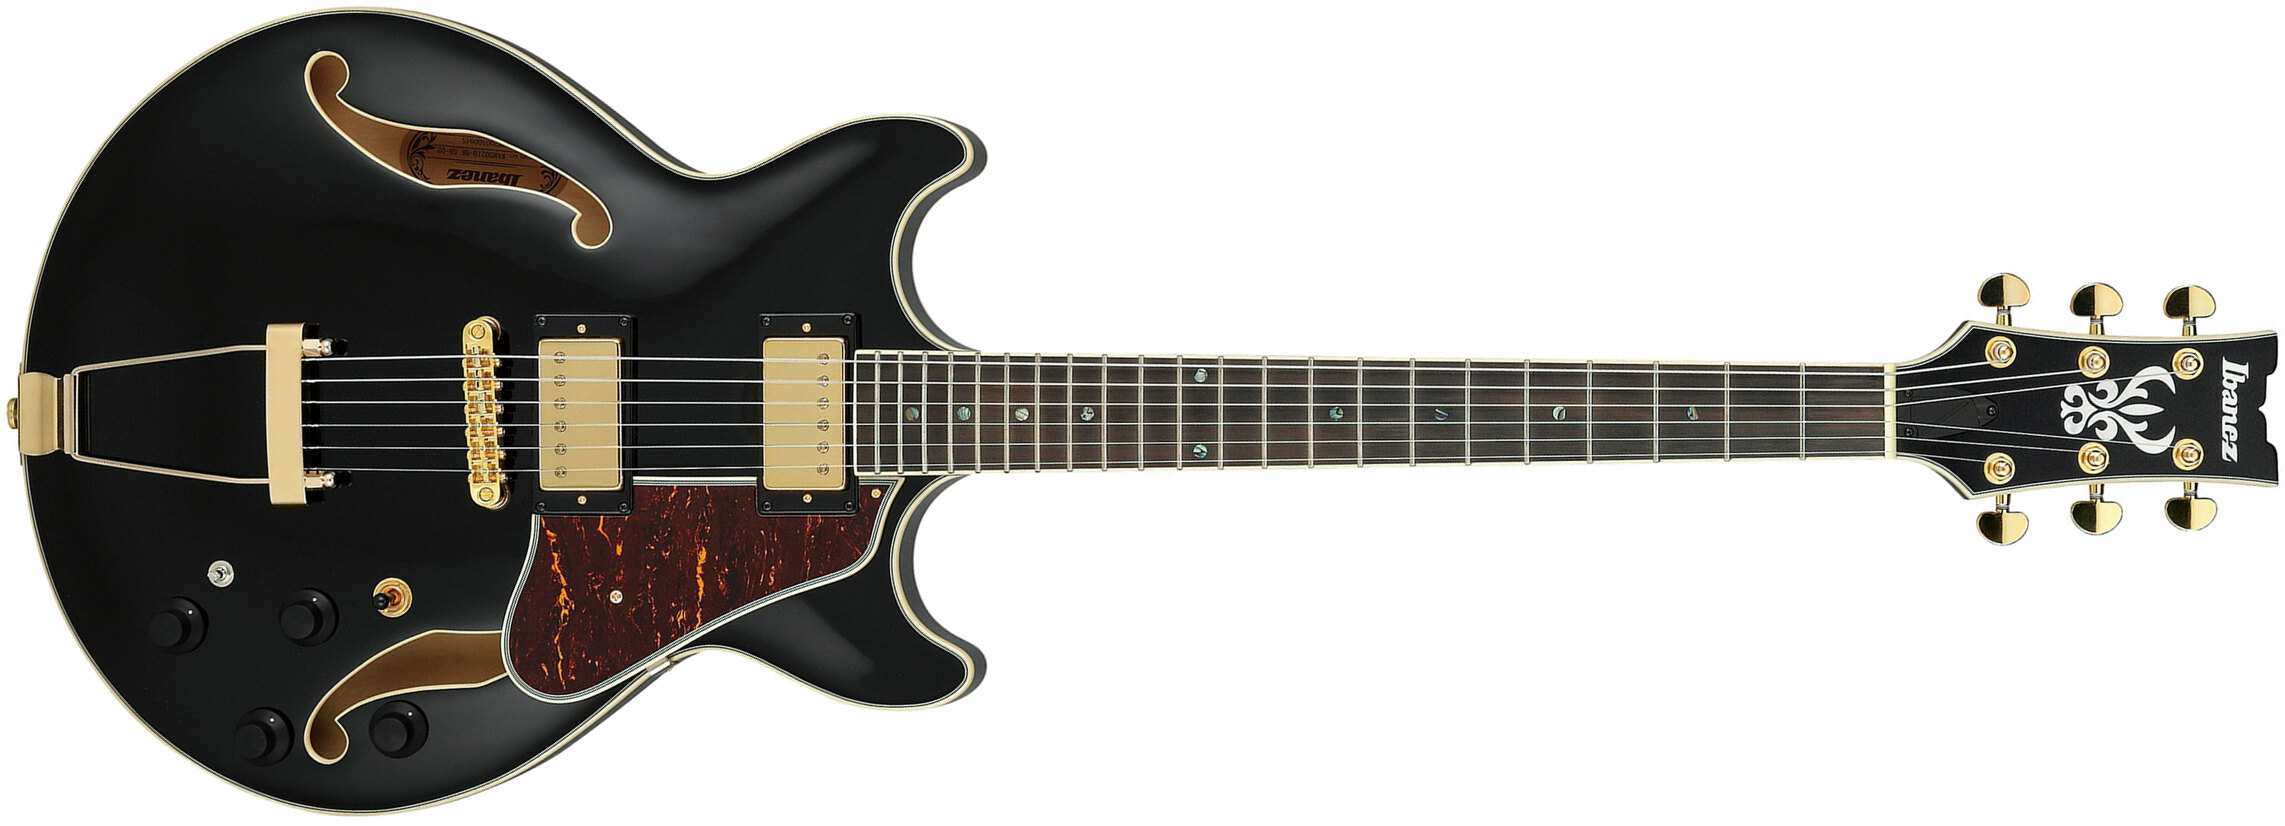 Ibanez Amh90 Crf Artcore Expressionist 2h Ht Bk - Black - Hollow-body electric guitar - Main picture